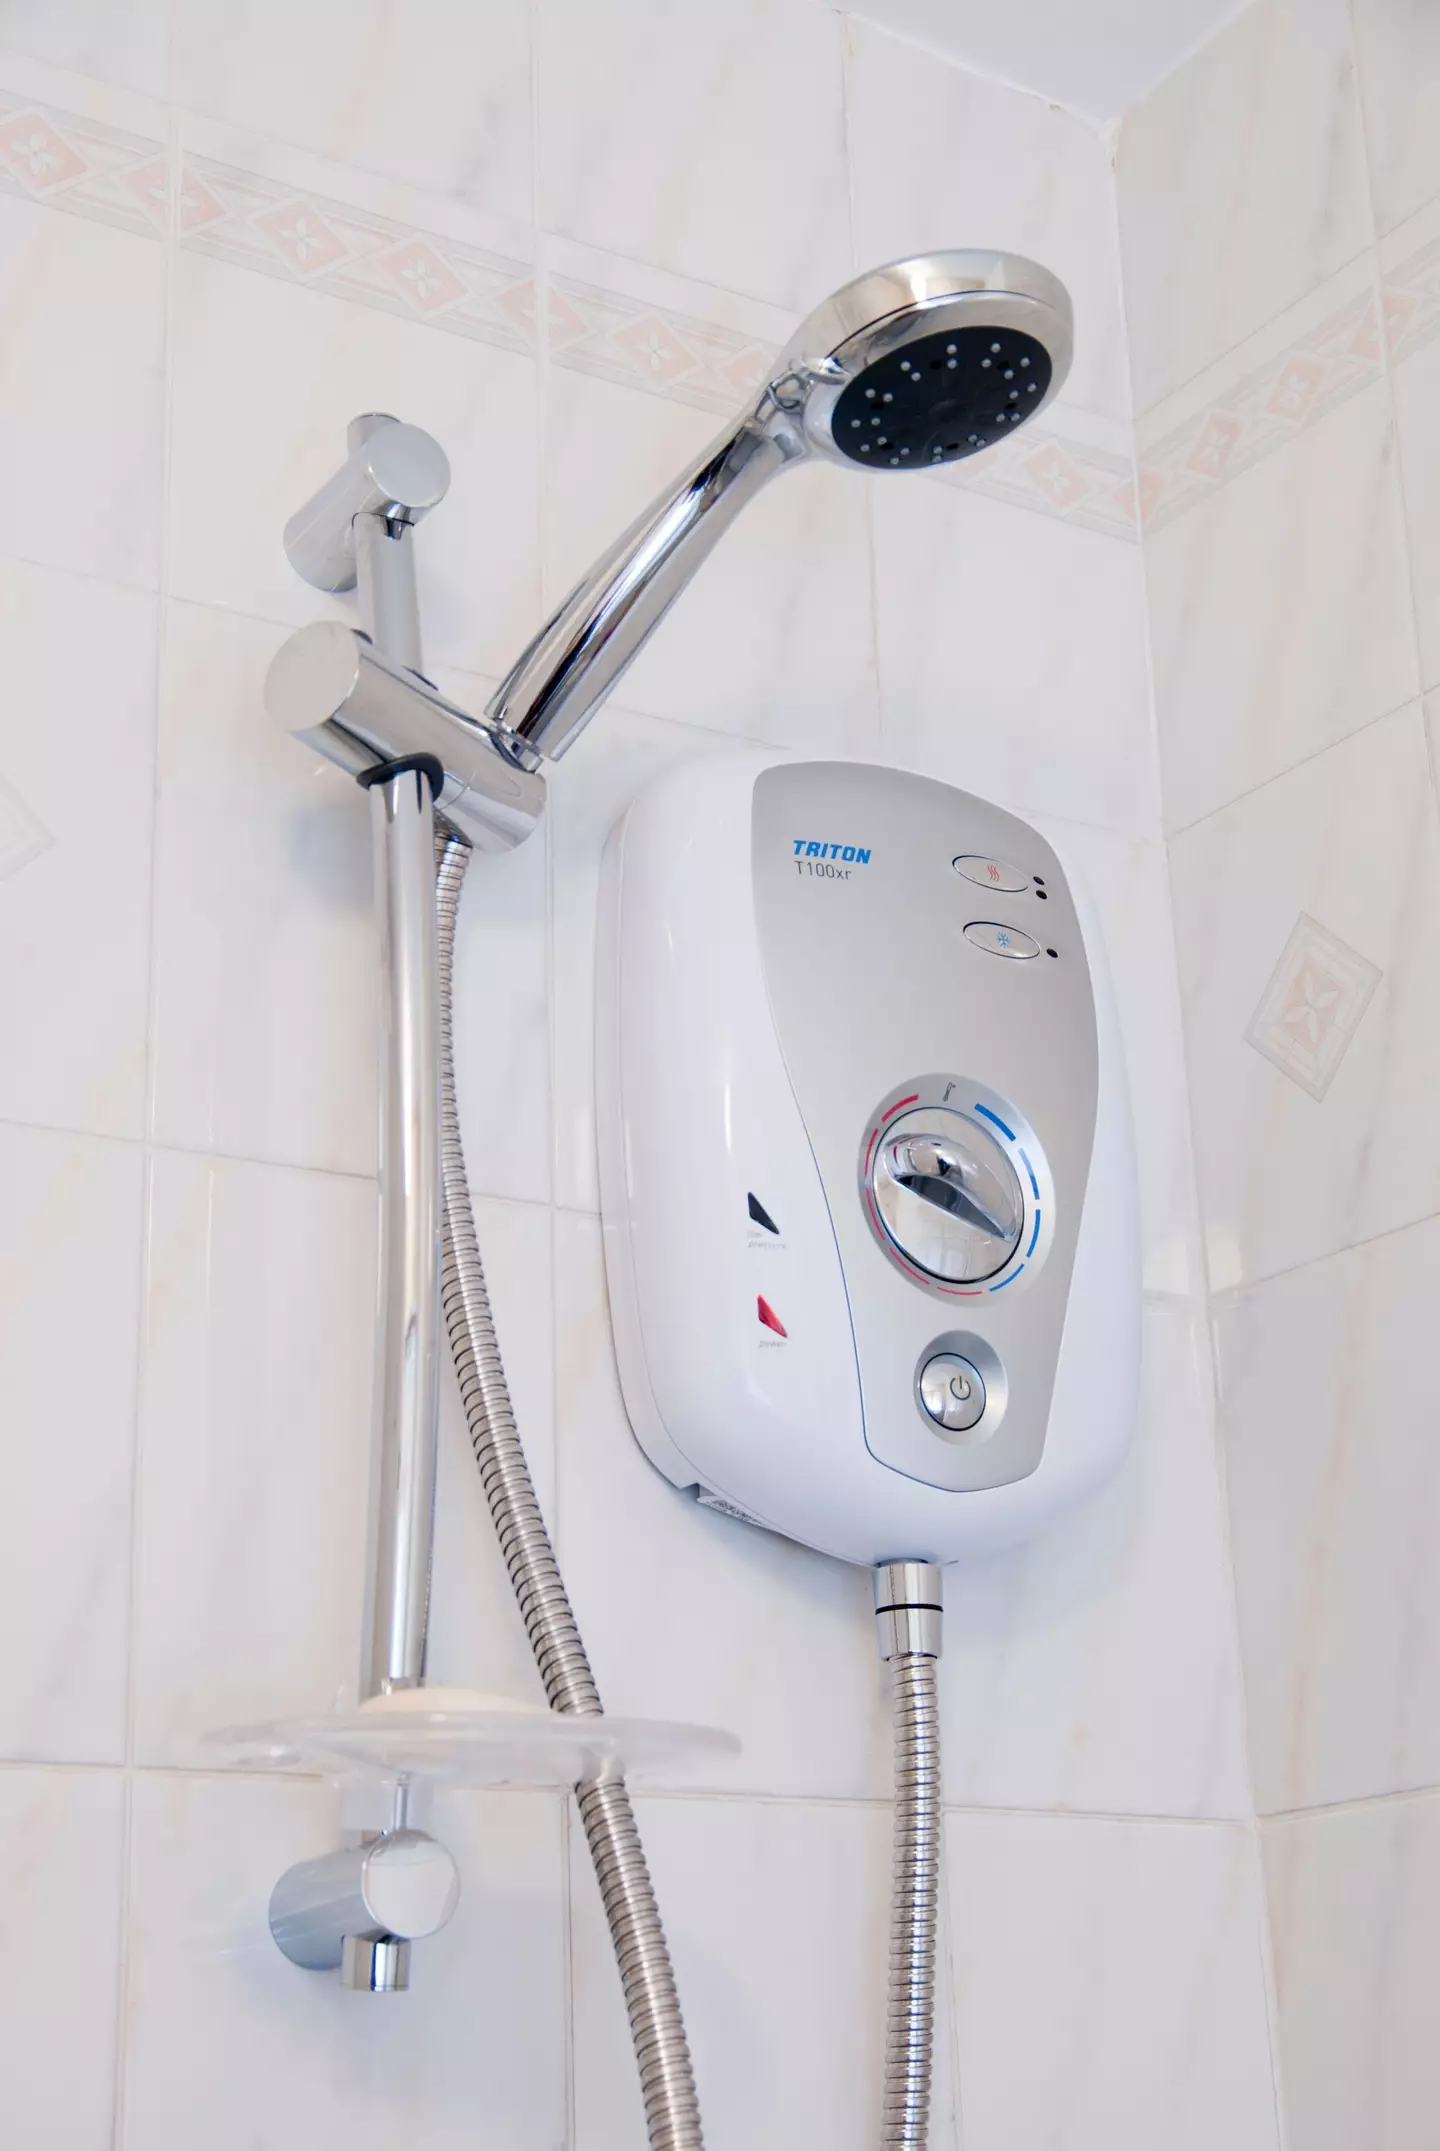 Electric showers are significantly more expensive.